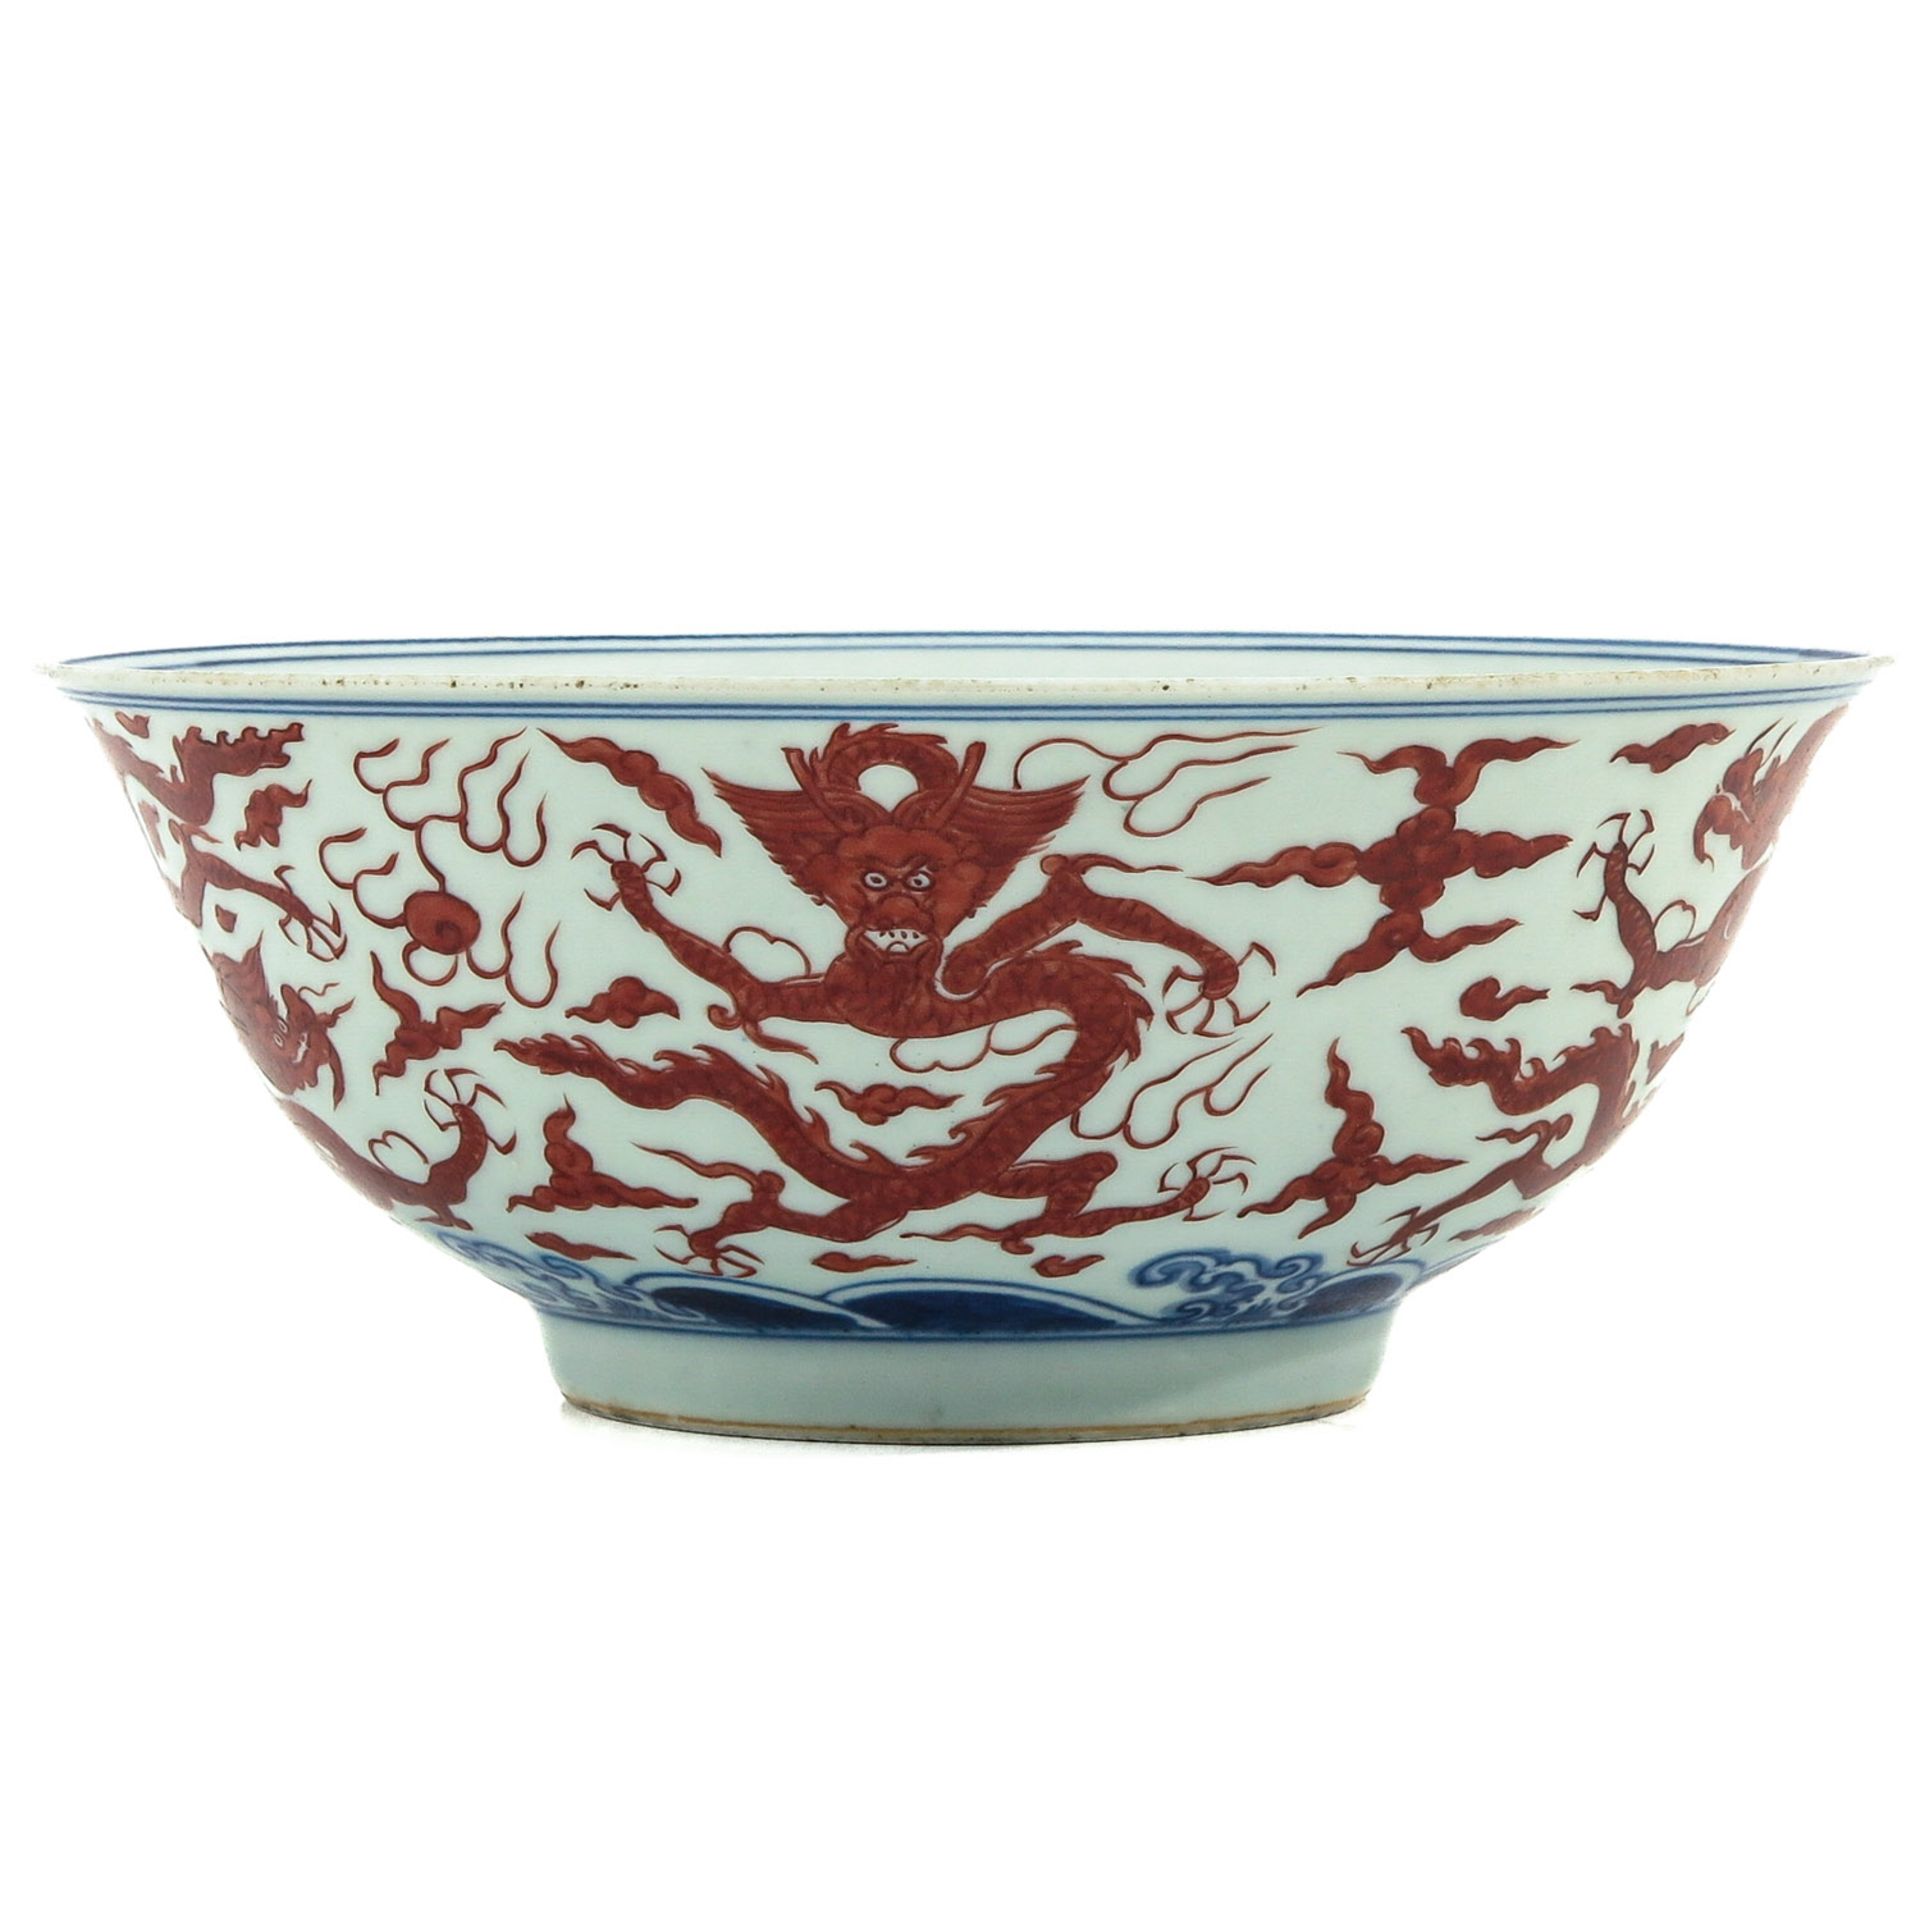 An Iron Blue and Red Decor Bowl